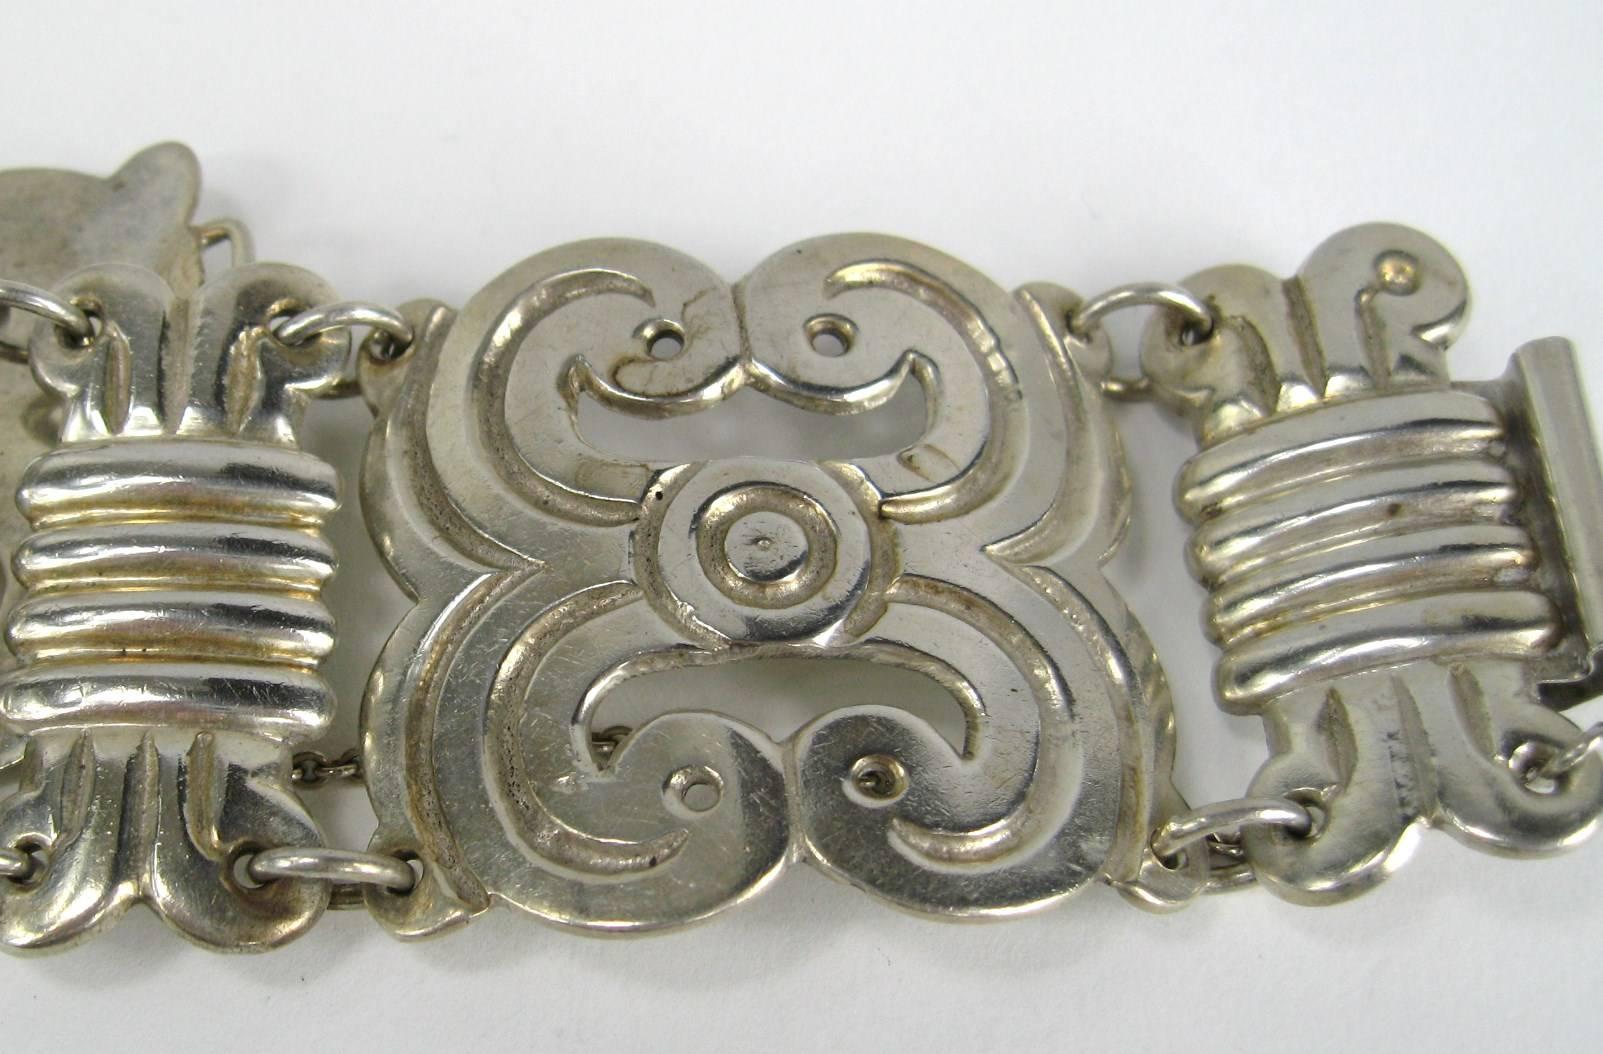 Stunning large paneled sterling silver bracelet. Hallmarked sterling / Mexico Safety chain affixed. Will fit up to a 6.5-inch wrist.  Panels are 1.45 inches wide. This is out of a massive collection of Hopi, Zuni, Navajo, Southwestern, sterling